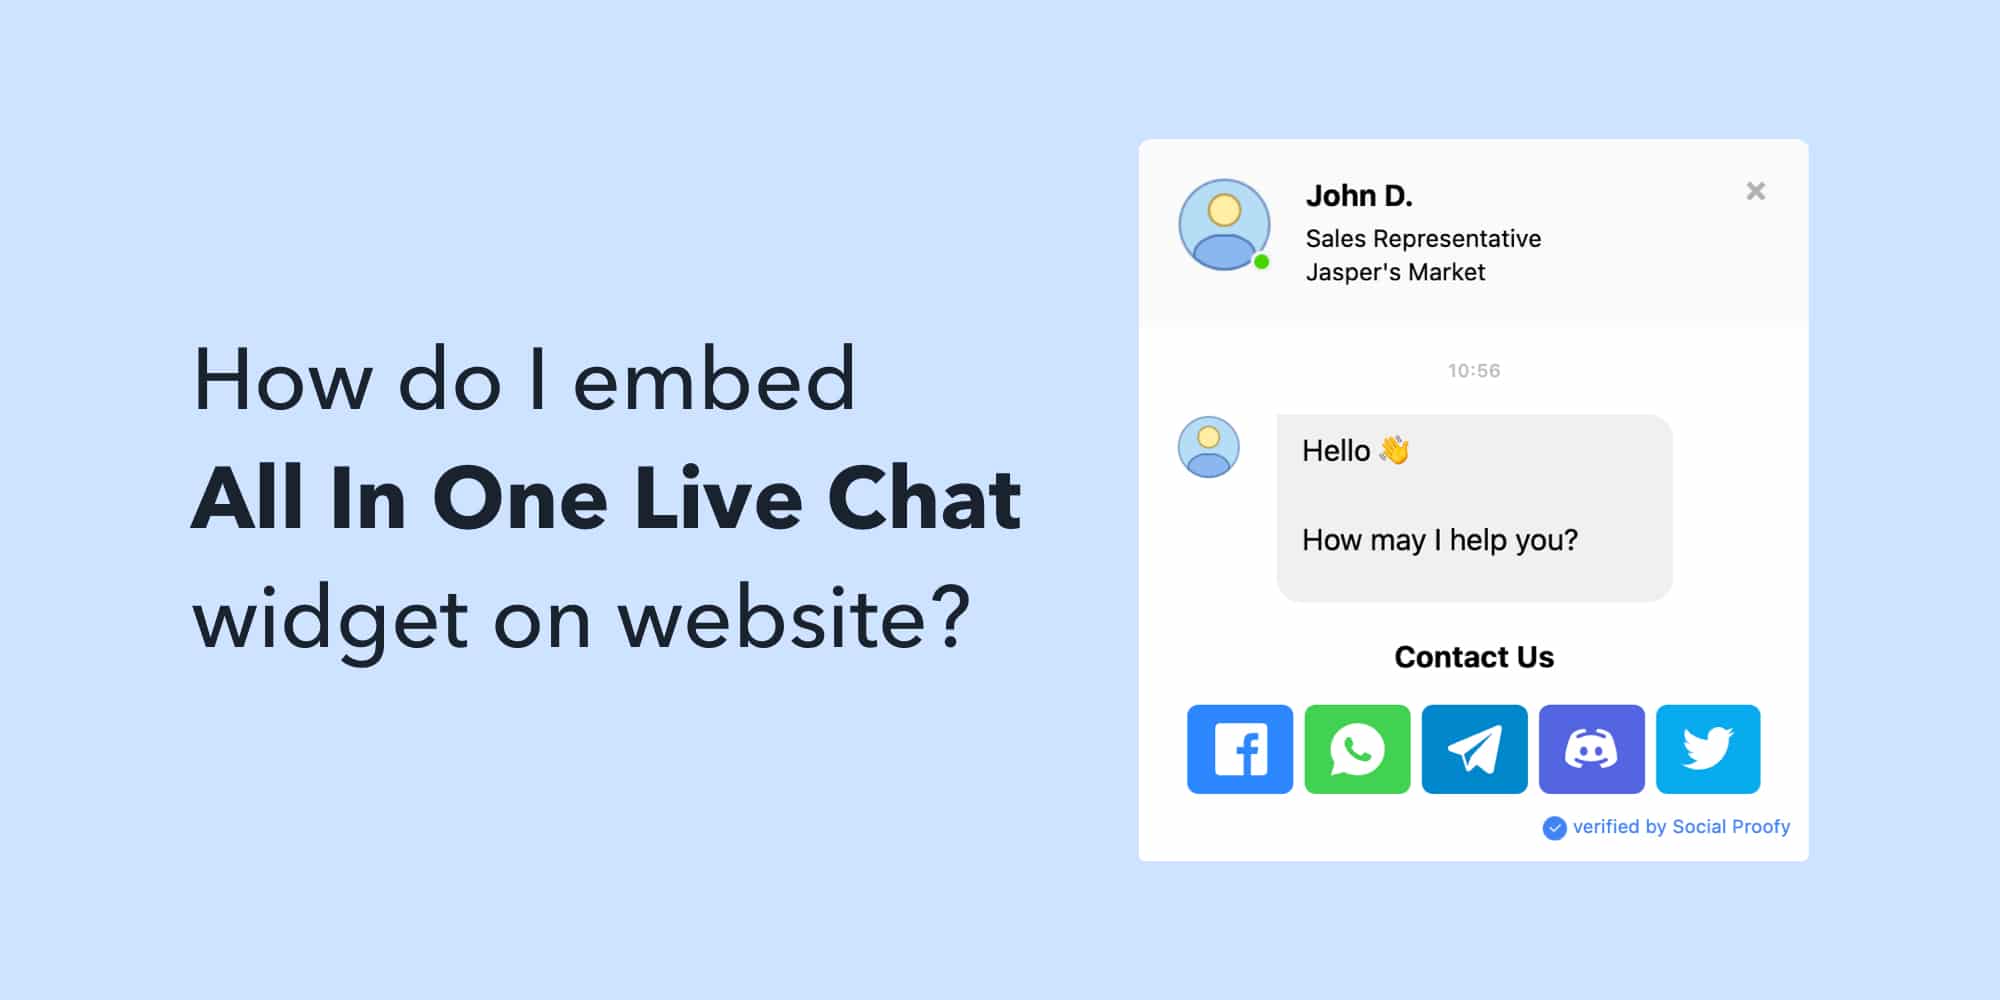 How Do I Embed All In One Live Chat Widget On Website?